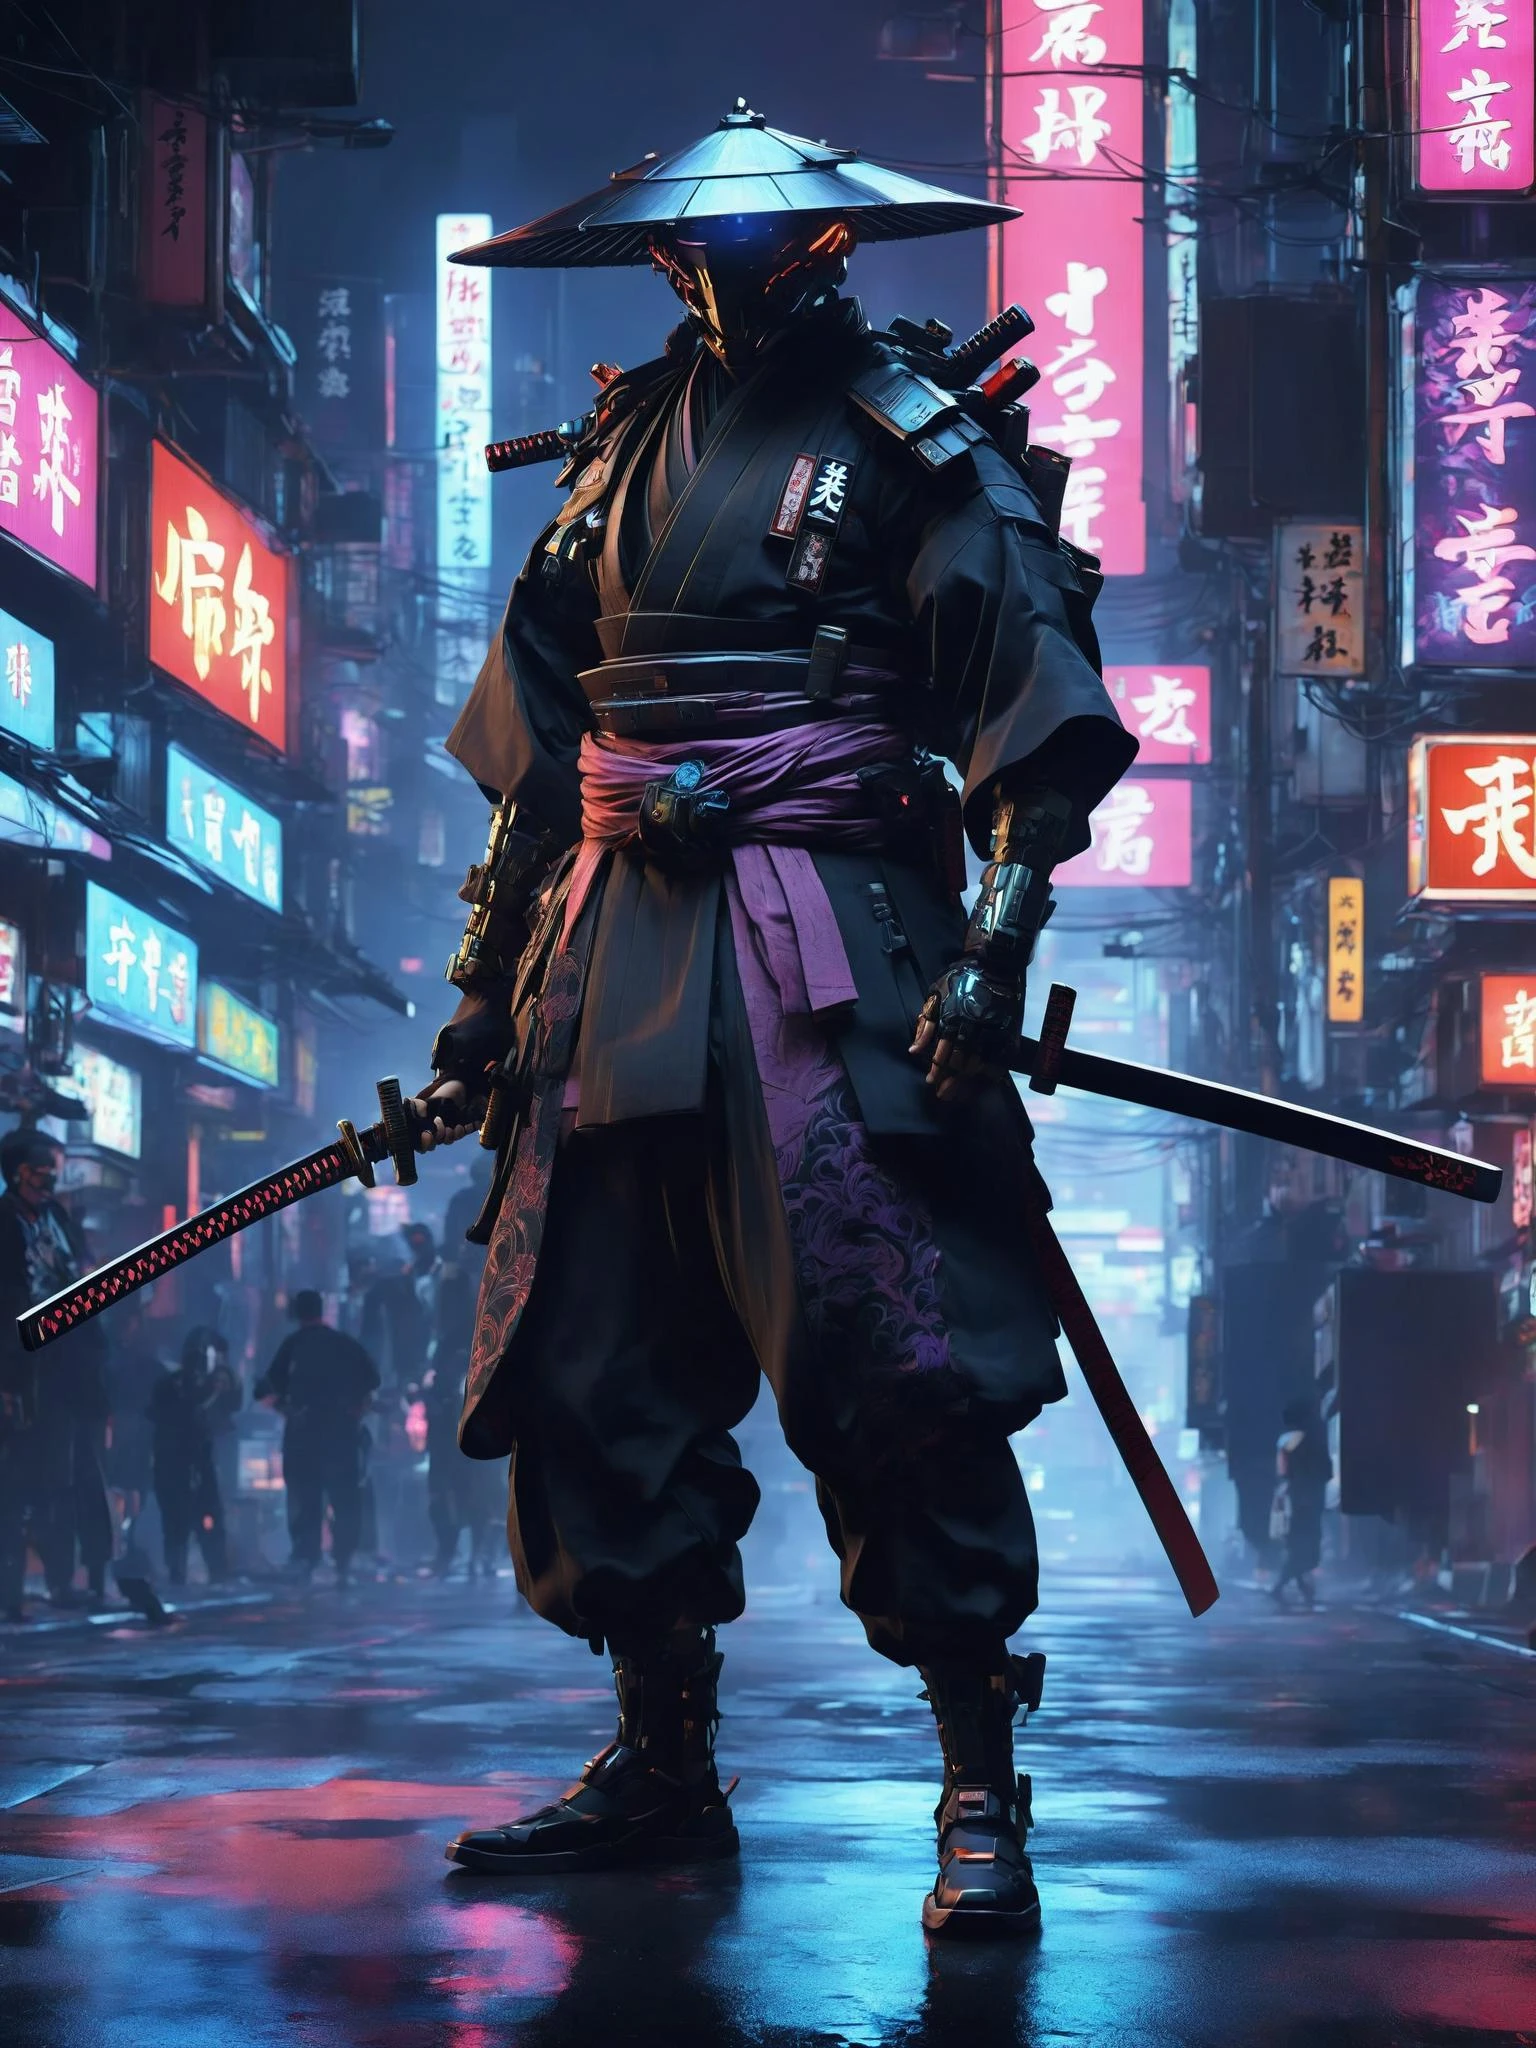 A ronin, augmented with cybernetic enhancements, wanders through the dark underbelly of a cybernetic Yakuza underworld. Clad in a mix of traditional hakama pants and modernized armor, they wield a plasma-infused katana, carving a path through the neon-lit shadows. The bustling streets echo with the whispers of a digitalized underworld, where honor clashes with corruption in this cyber-enhanced feudal landscape , 